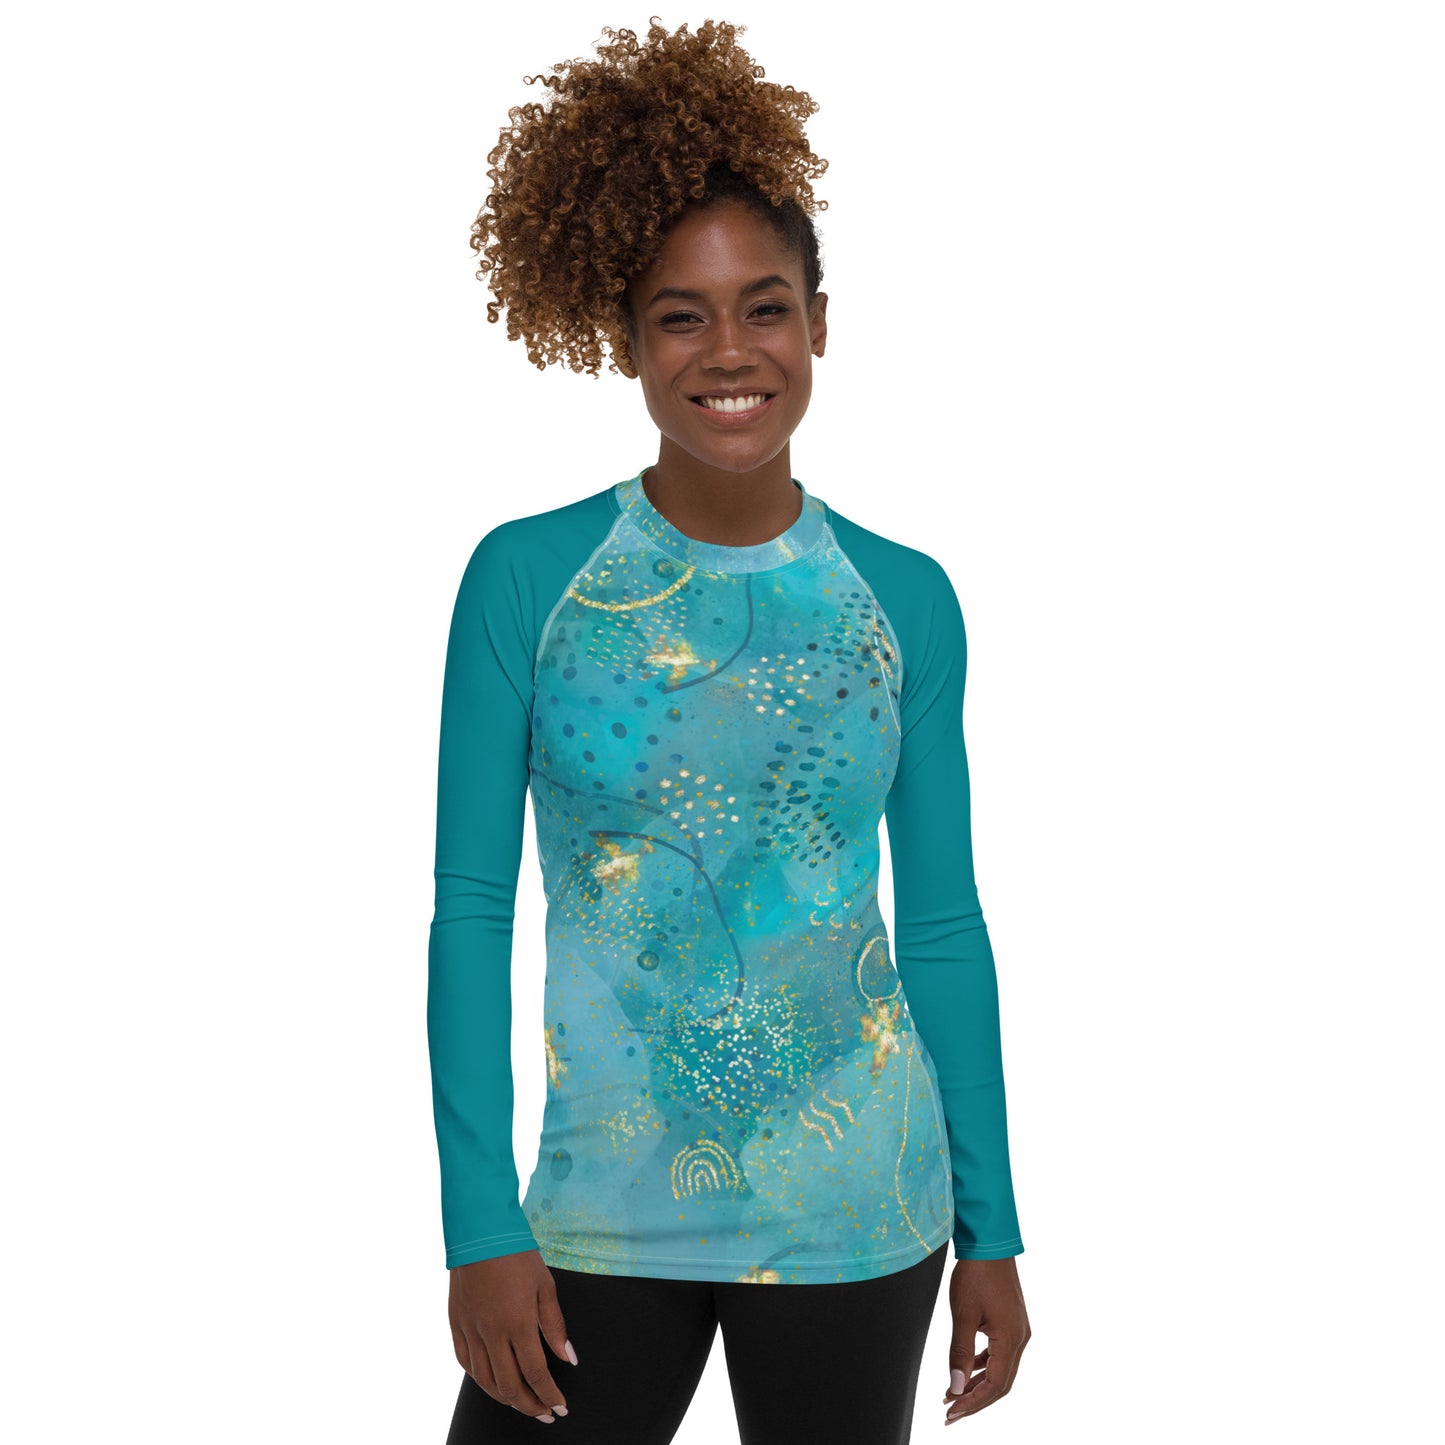 Women's All Over Print - Lux Bubbles - Lightweight Long Sleeve Performance Shirt - 50+ UV Protection - Moisture Wicking